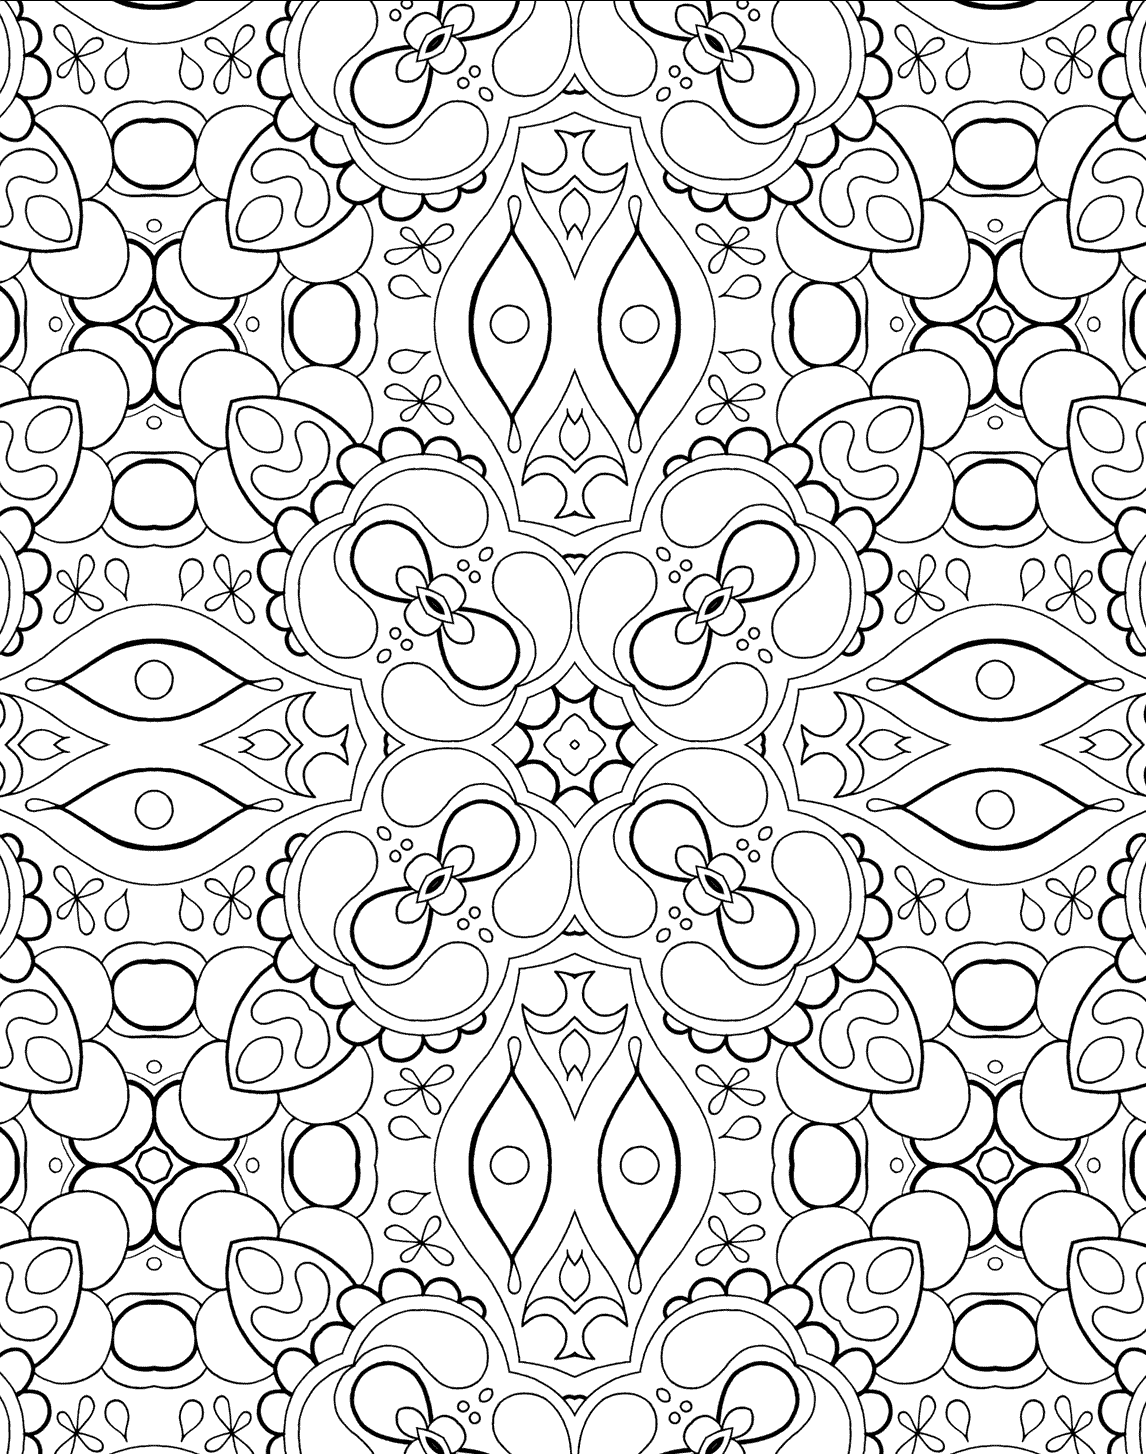 mandala-mindfulness-coloring-page-free-printable-coloring-pages-for-kids